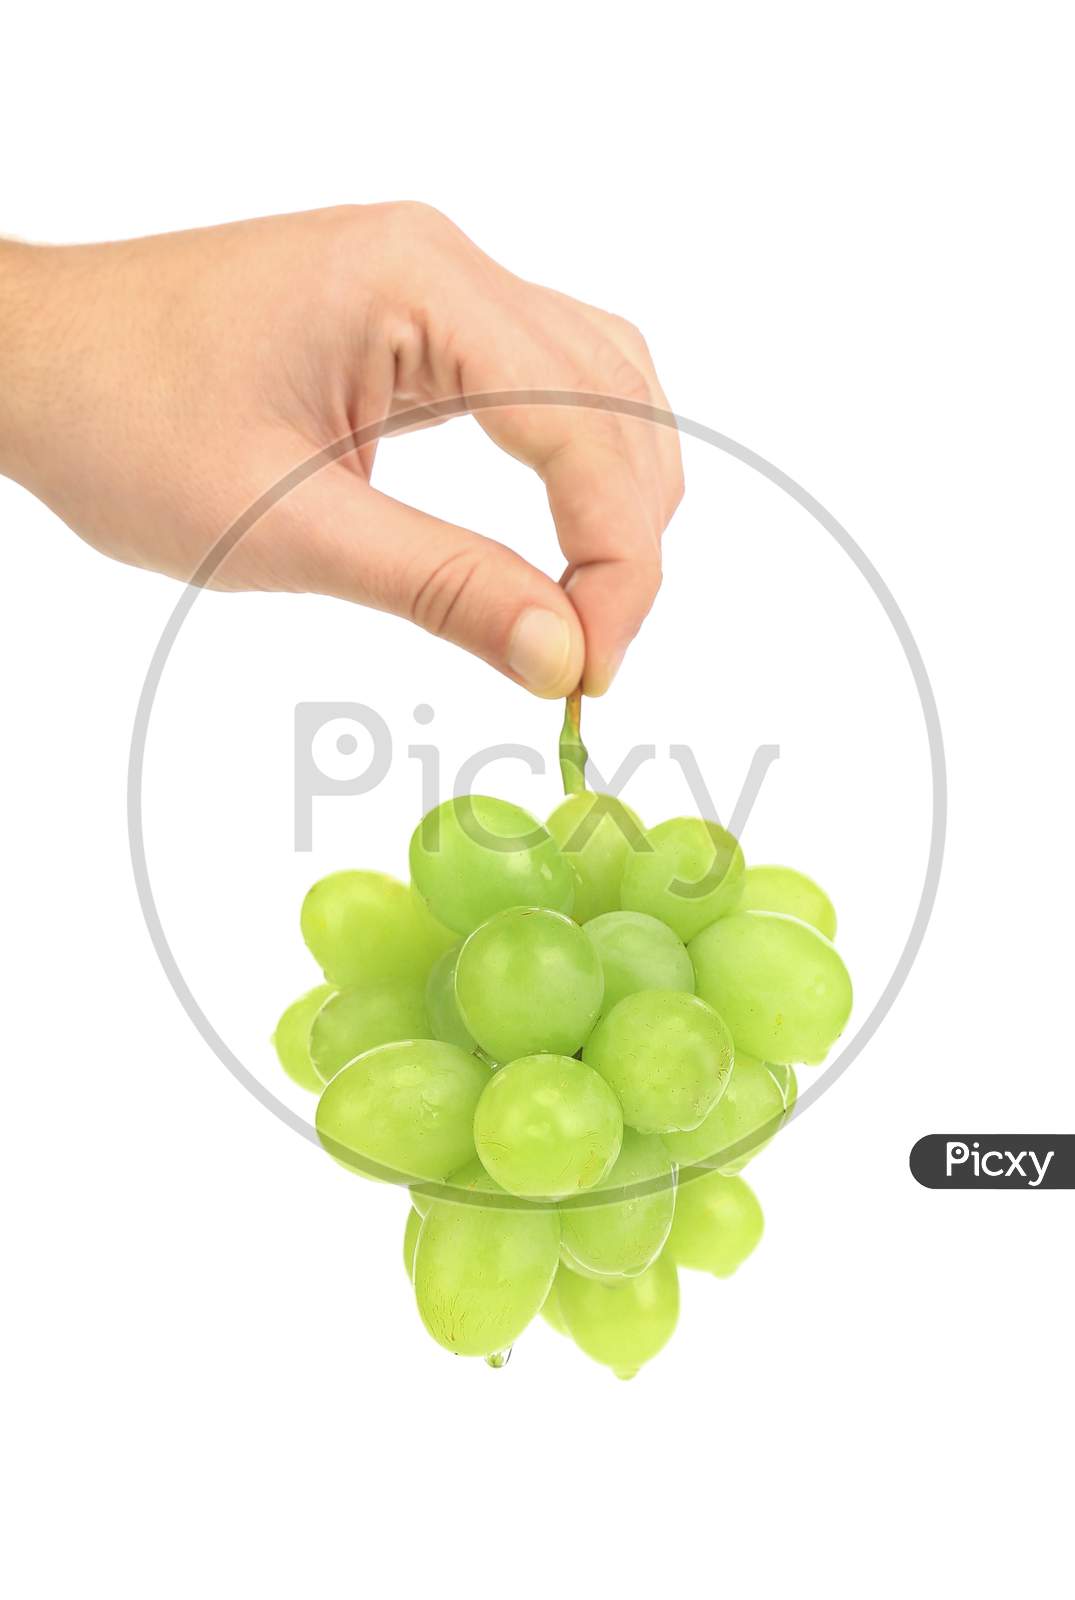 Green Ripe Grapes In Hand. Isolated On A White Background.